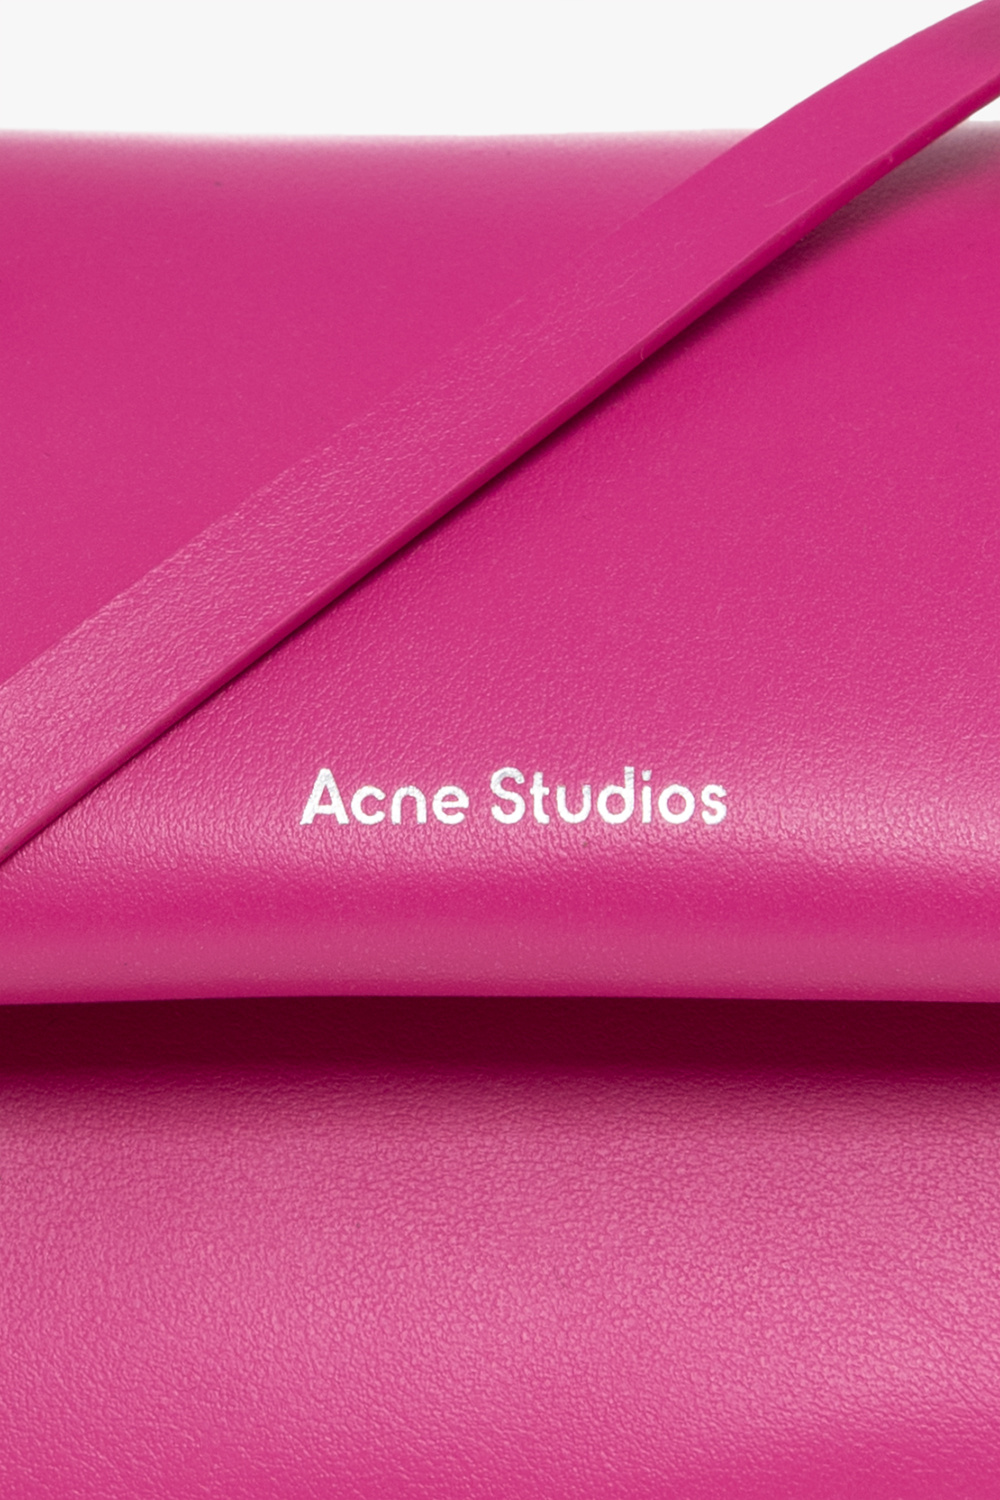 Acne Studios You need a certain bag to feel complete